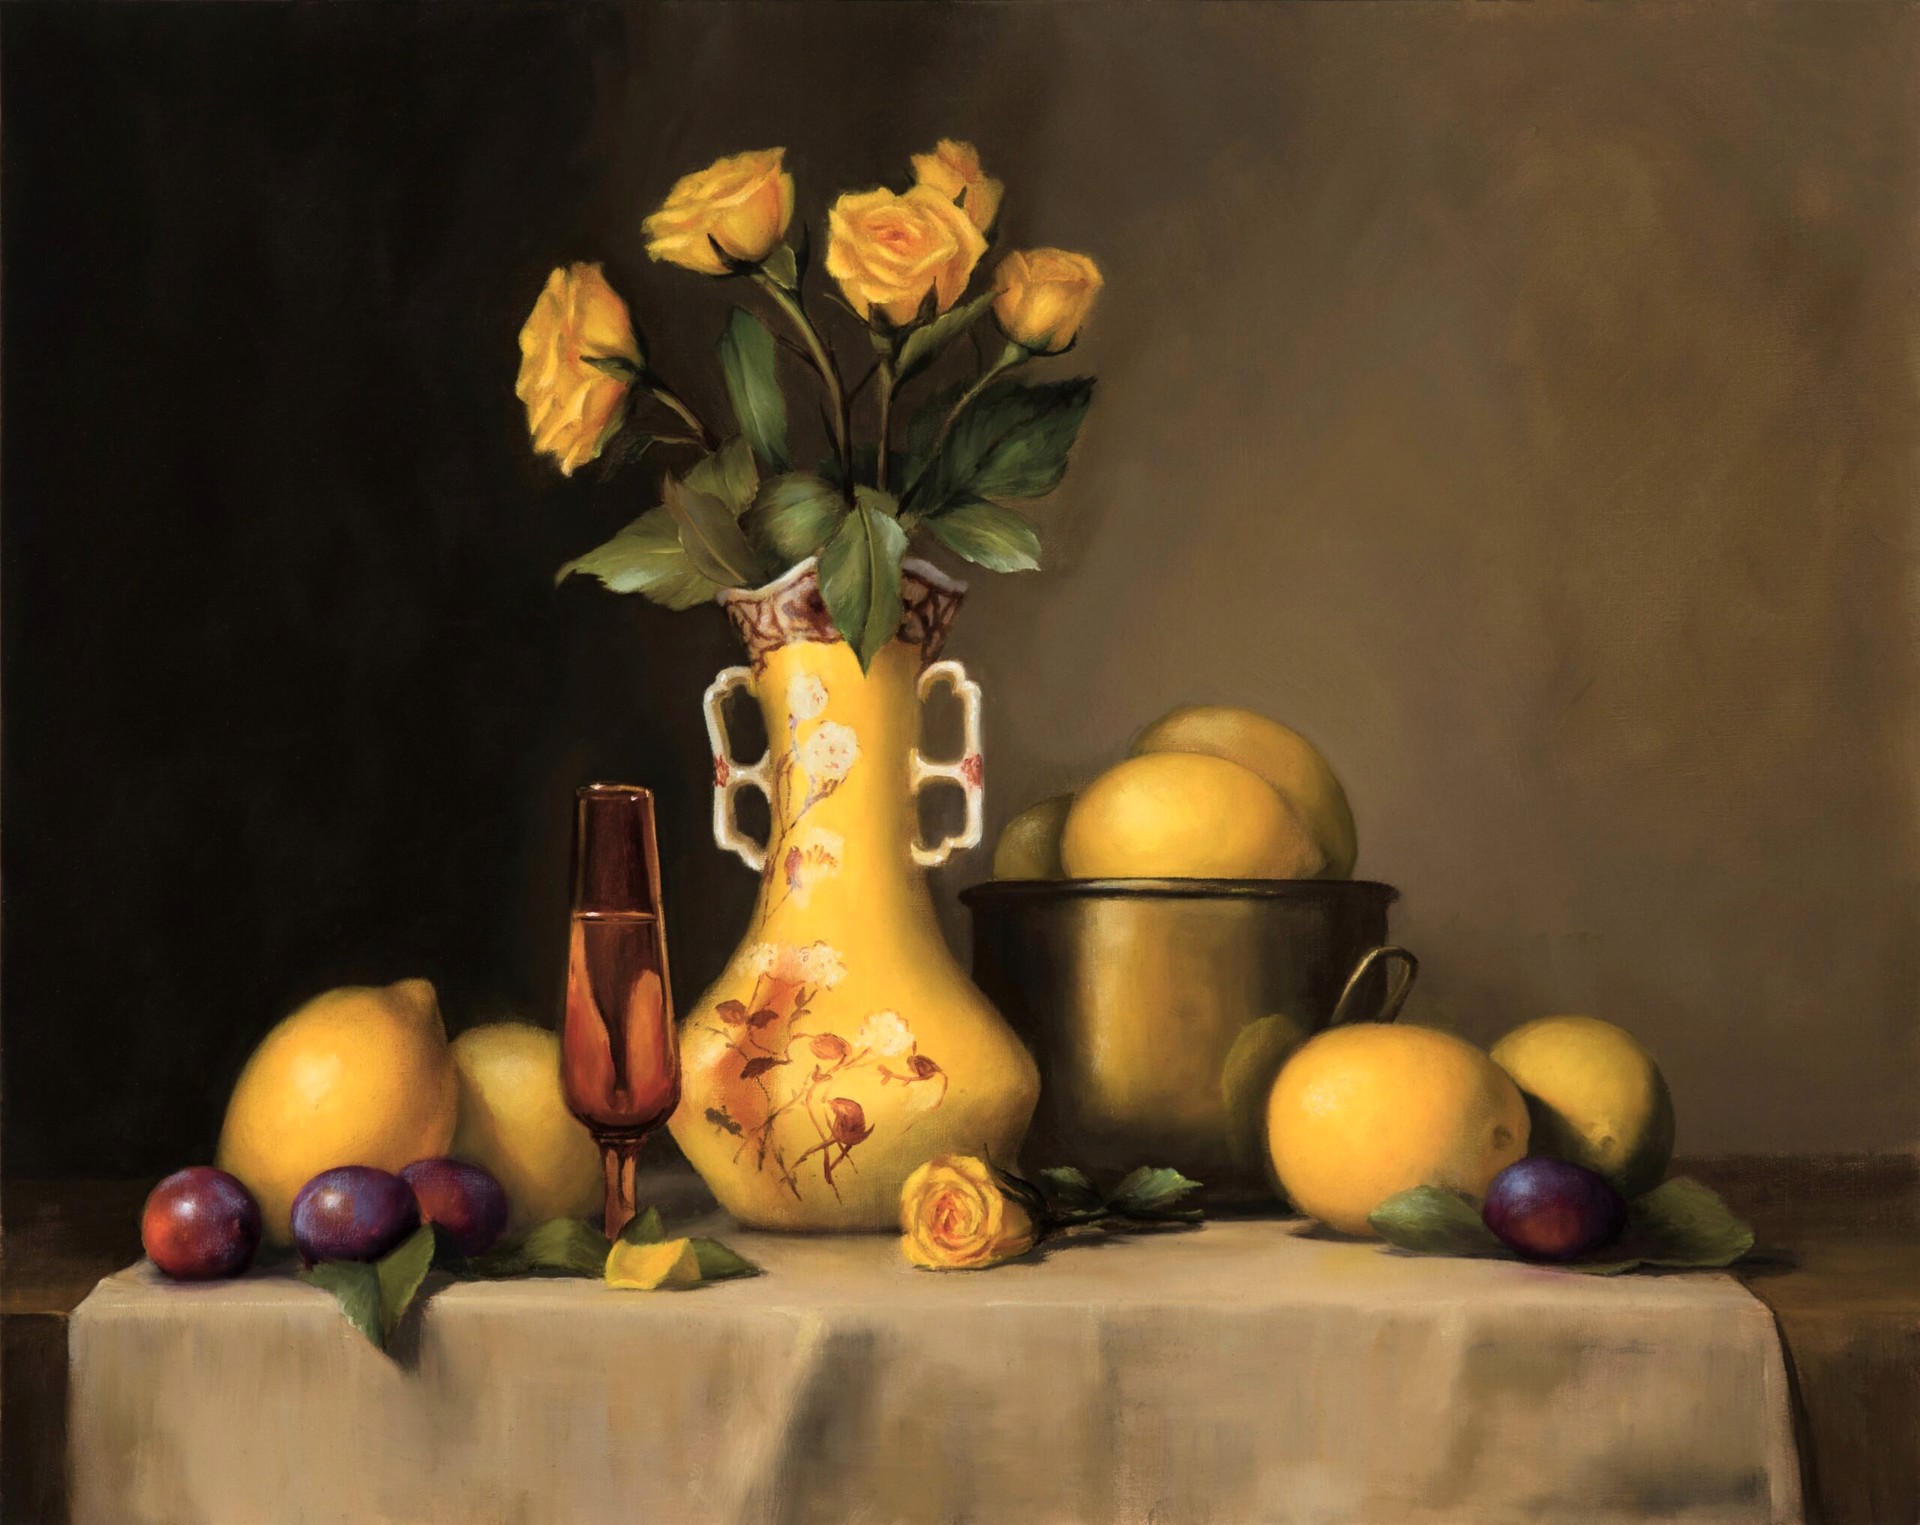 Patricia Claire Tribastone "Symphony of Yellows" by Oil Painters of America